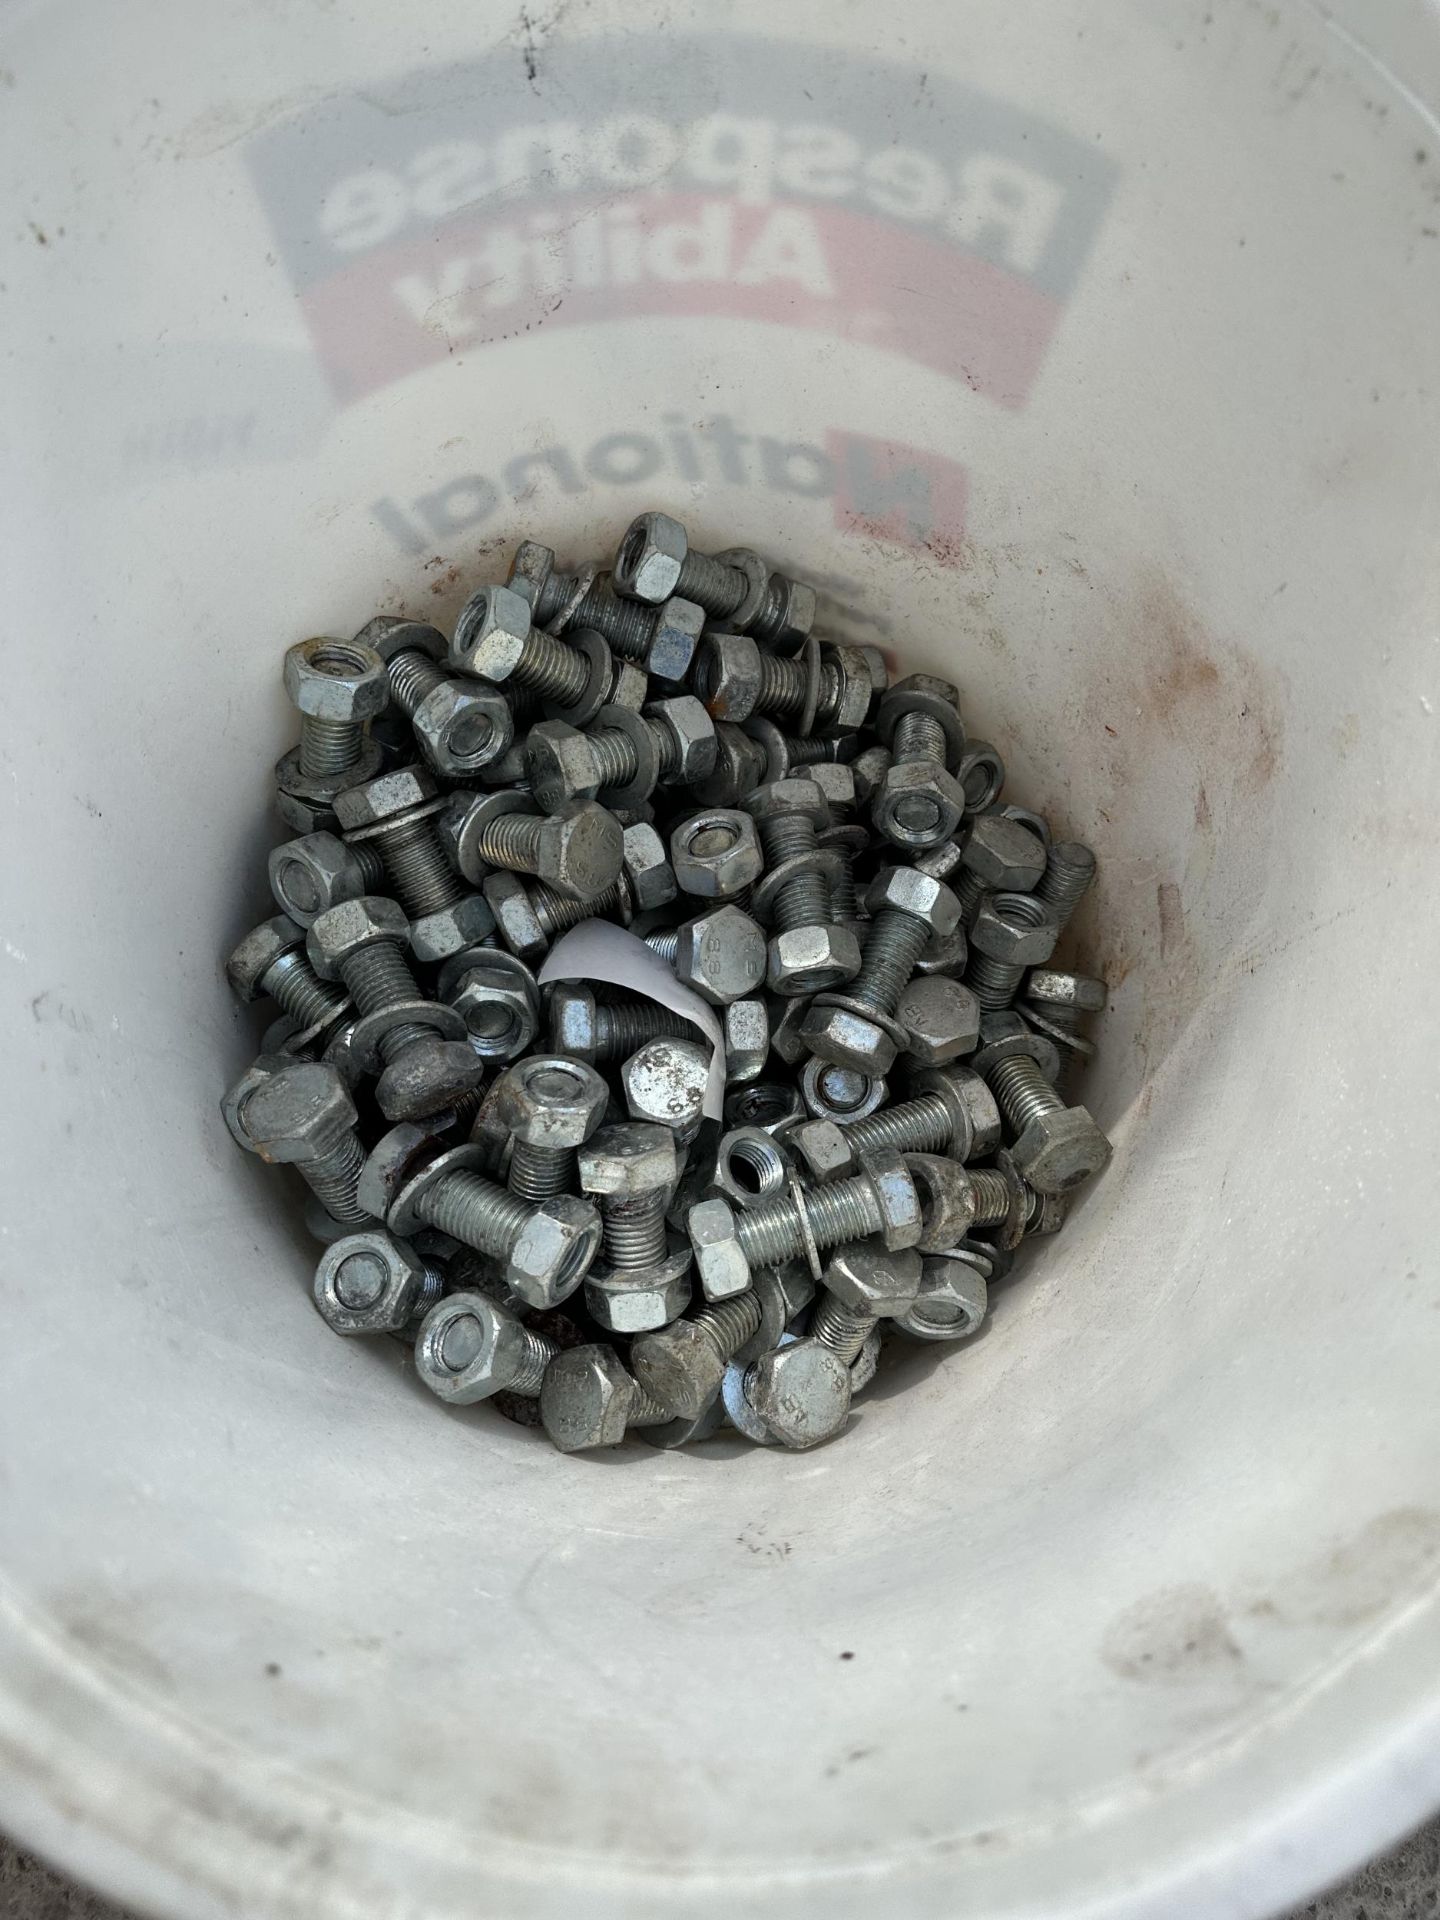 A LARGE QIUANTITY OF HEAVY DUTY NUTS AND BOLTS - Bild 2 aus 2